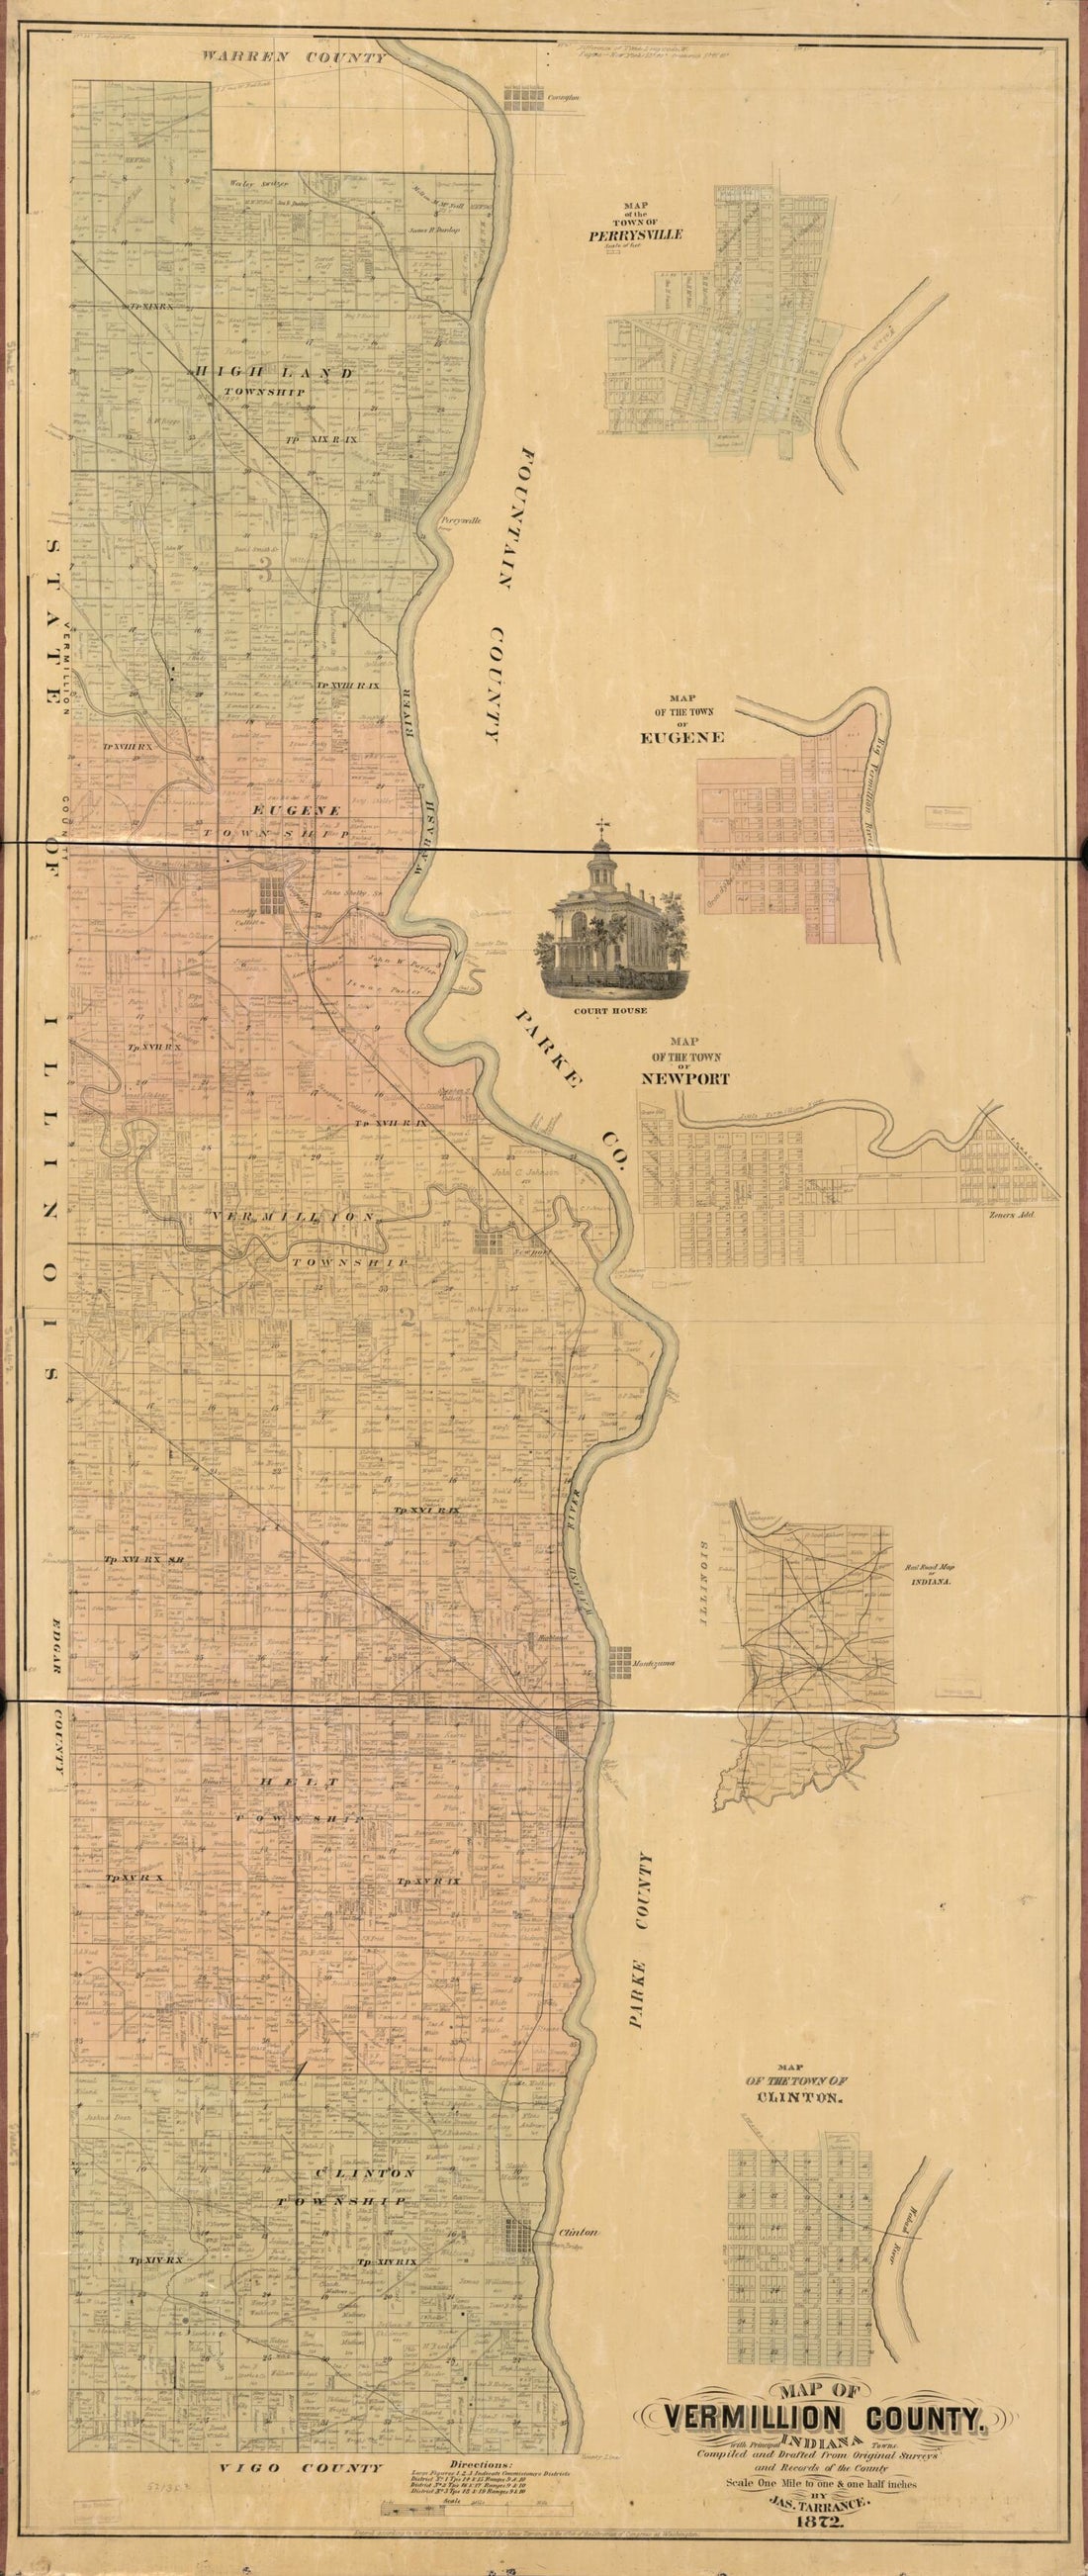 This old map of Map of Vermillion County, Indiana from 1872 was created by James Tarrance in 1872